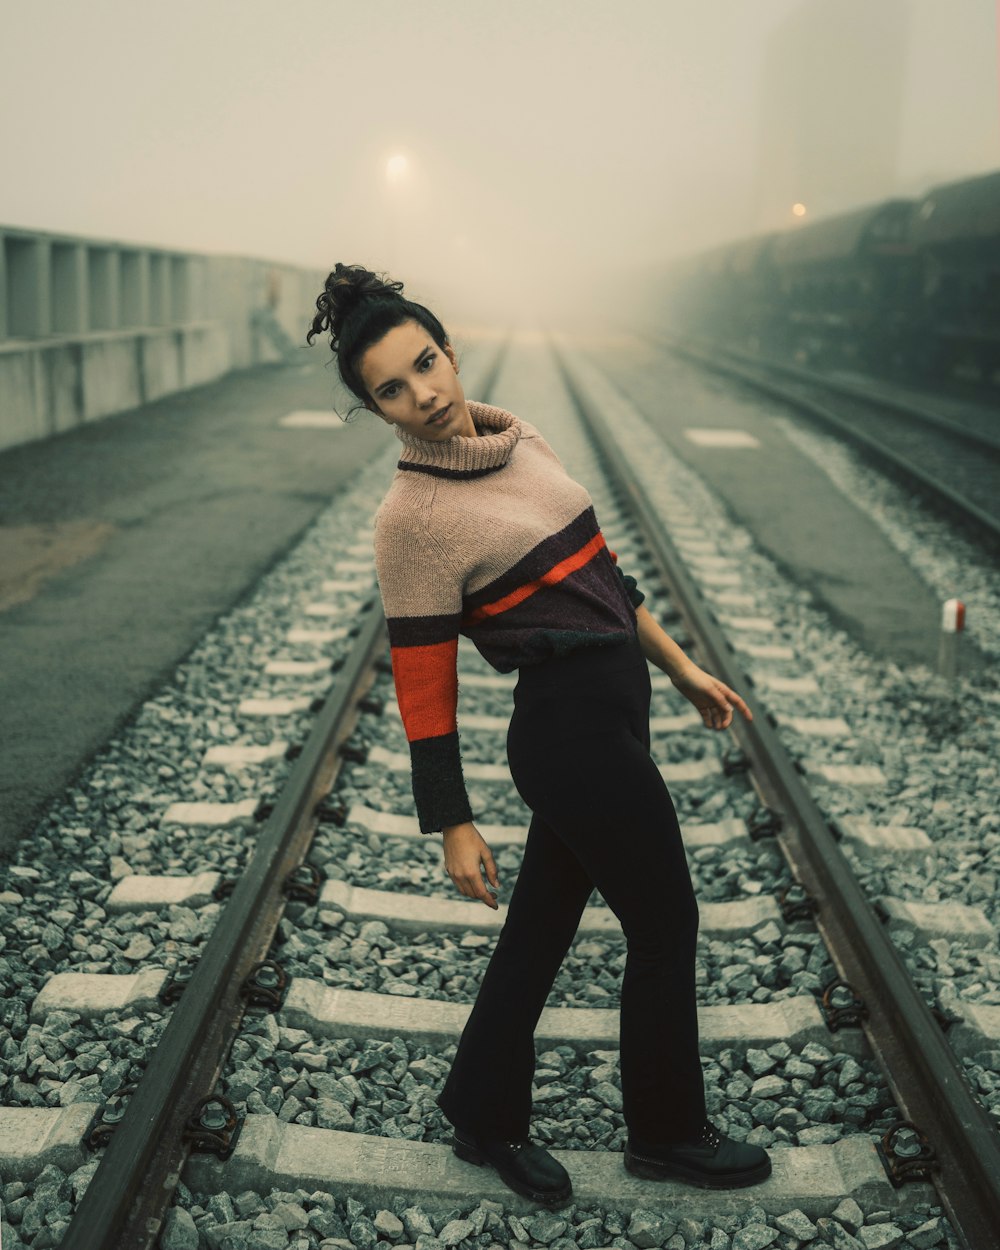 woman in black pants standing on train rail during daytime